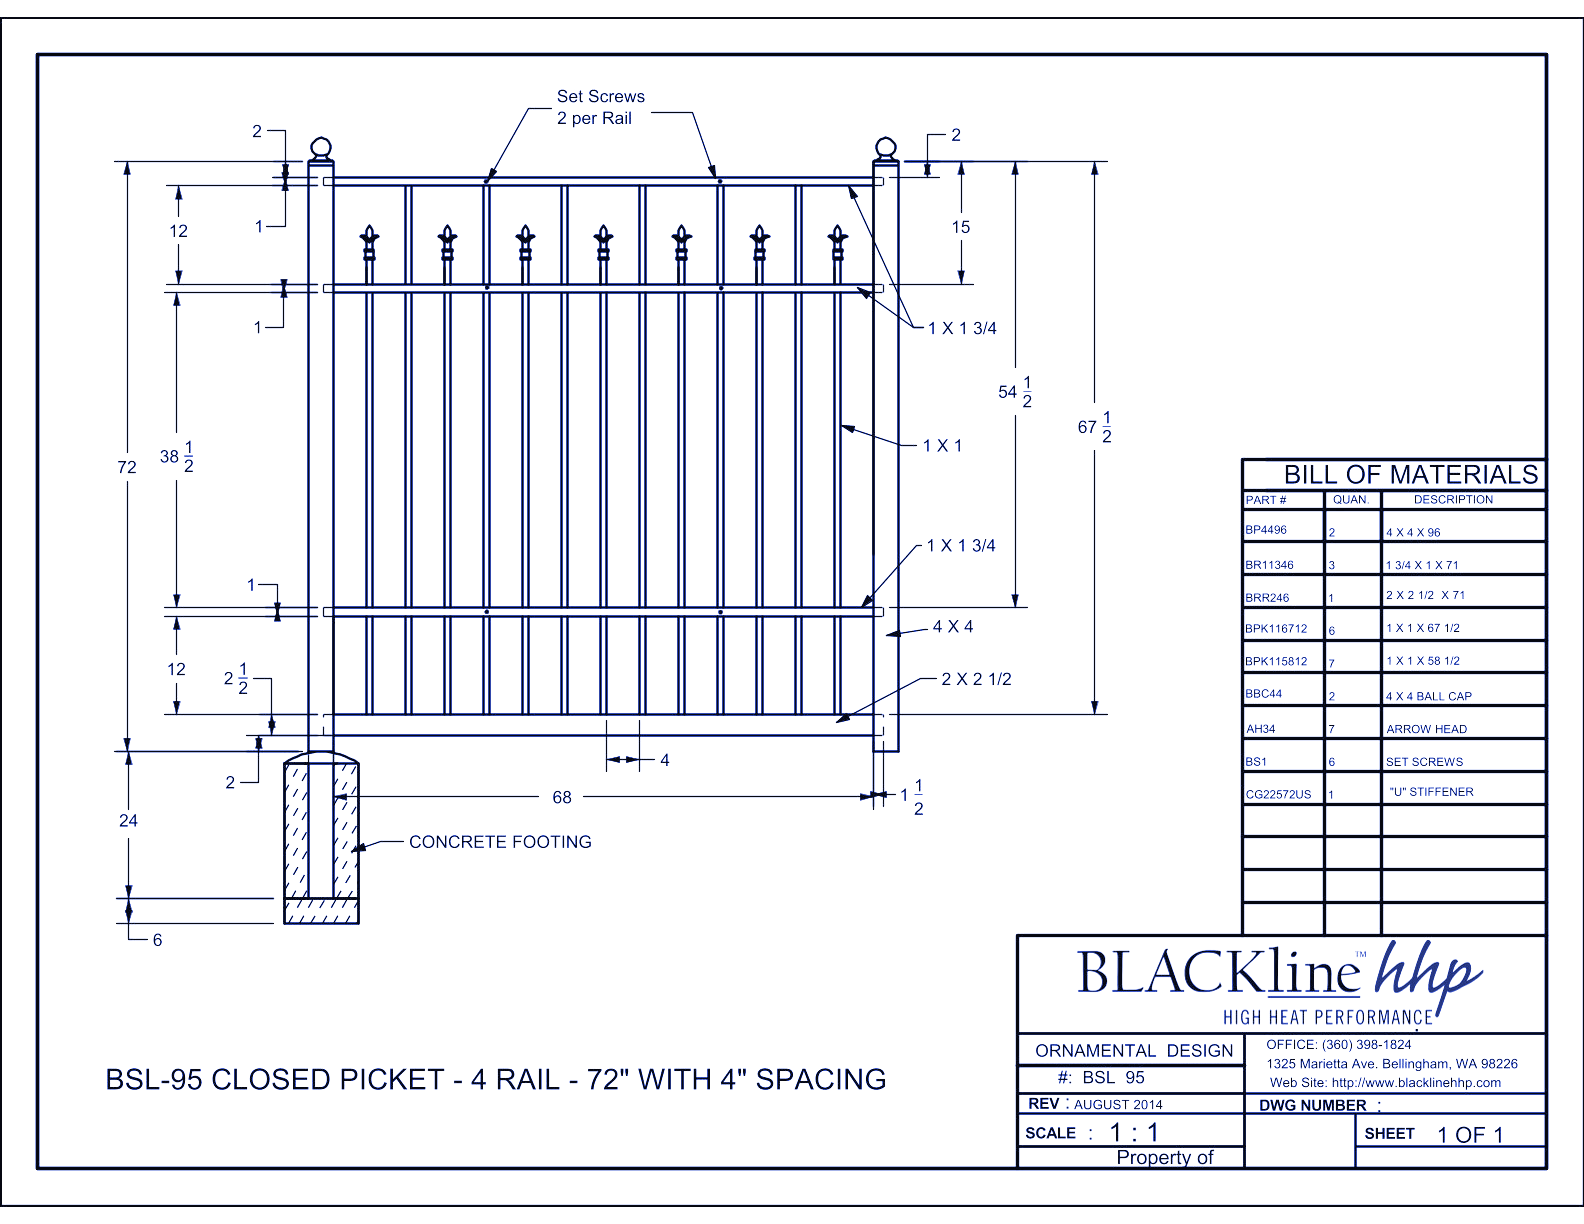 BSL-95: Closed Picket - 4 Rail - 72" with 4" Spacing